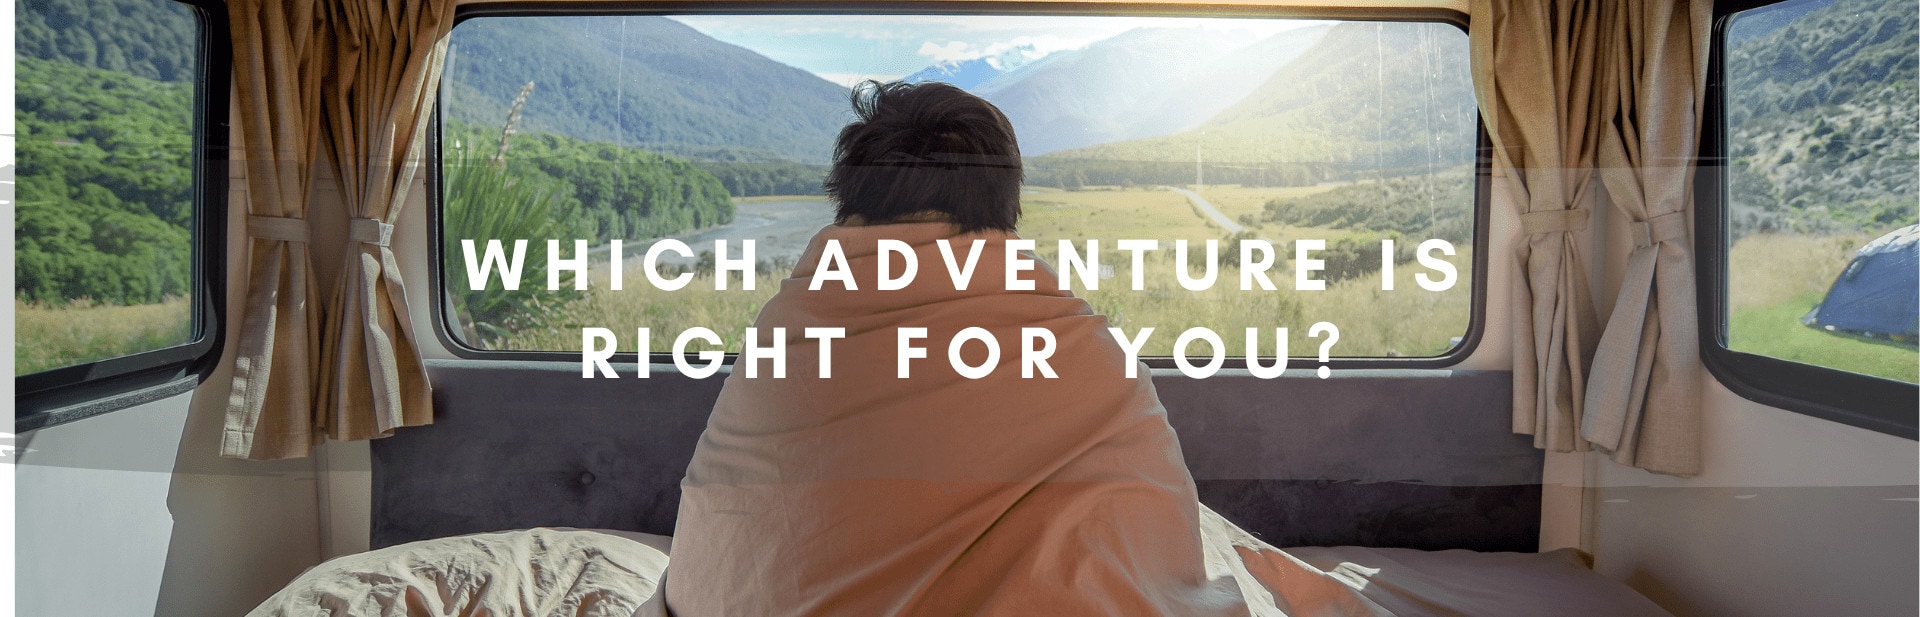 Camping Vs. Backpacking: Which Adventure is Right for You?